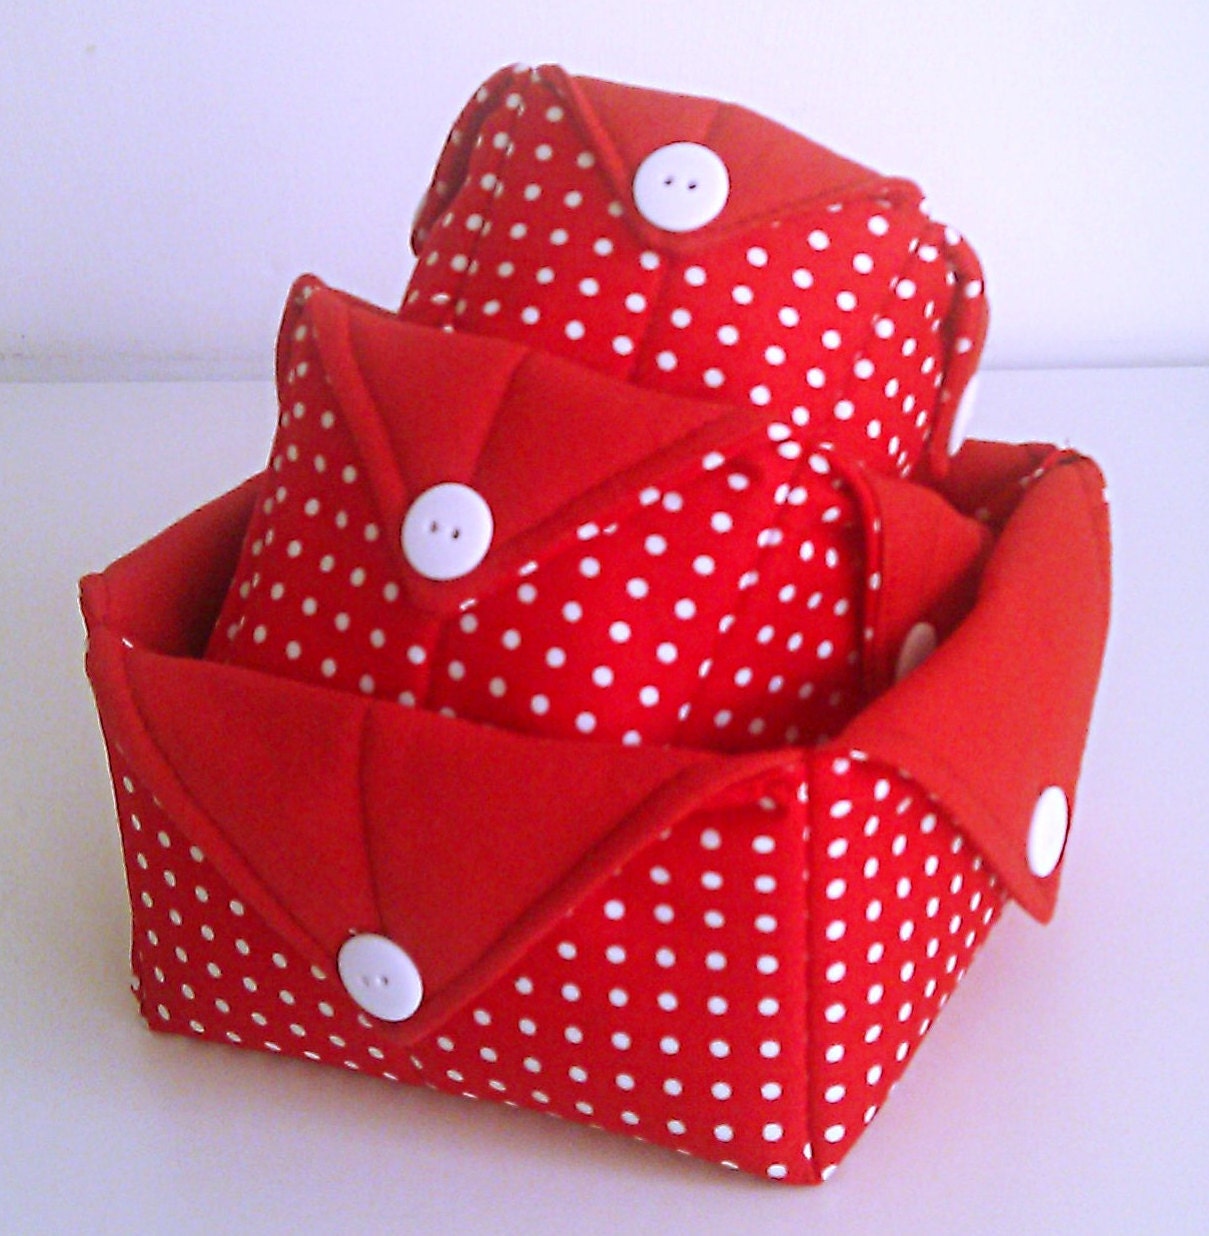 Set of 3 Fabric Storage Baskets, Polka Dot Baskets, Fabric Containers ...